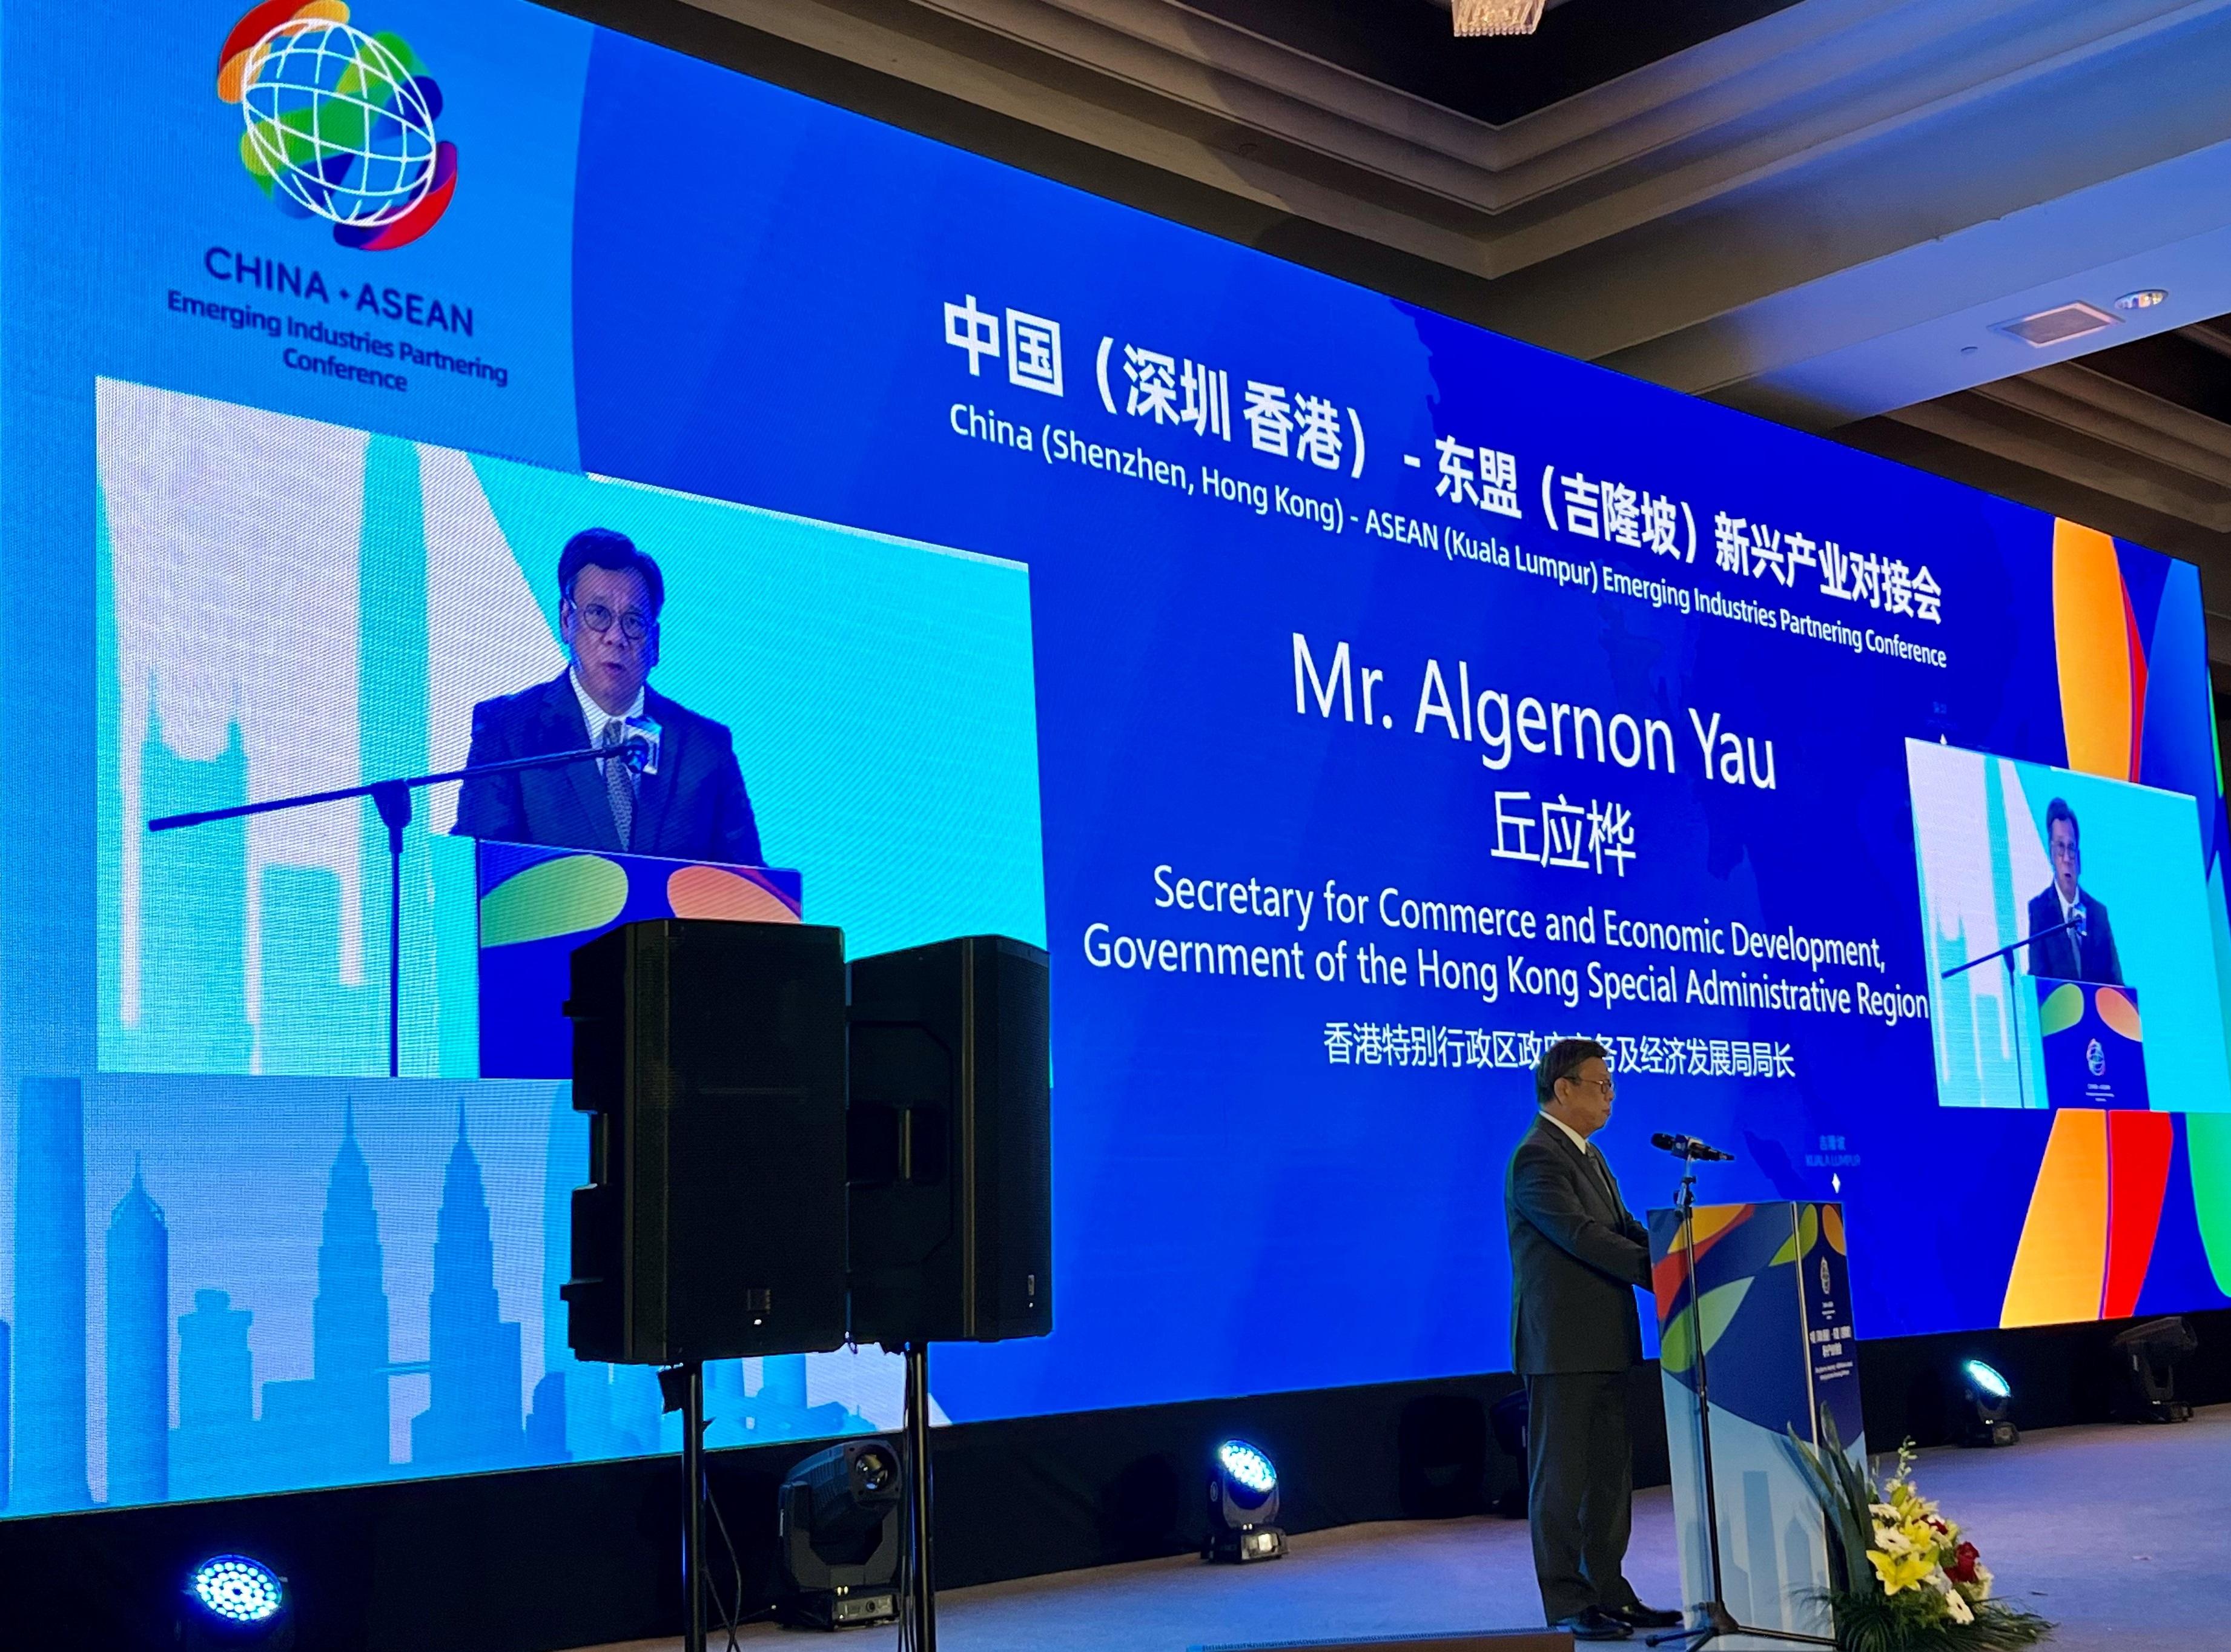 The Secretary for Commerce and Economic Development, Mr Algernon Yau, speaks at the China (Shenzhen, Hong Kong) - ASEAN (Kuala Lumpur) Emerging Industries Partnering Conference in Kuala Lumpur, Malaysia, today (September 21).